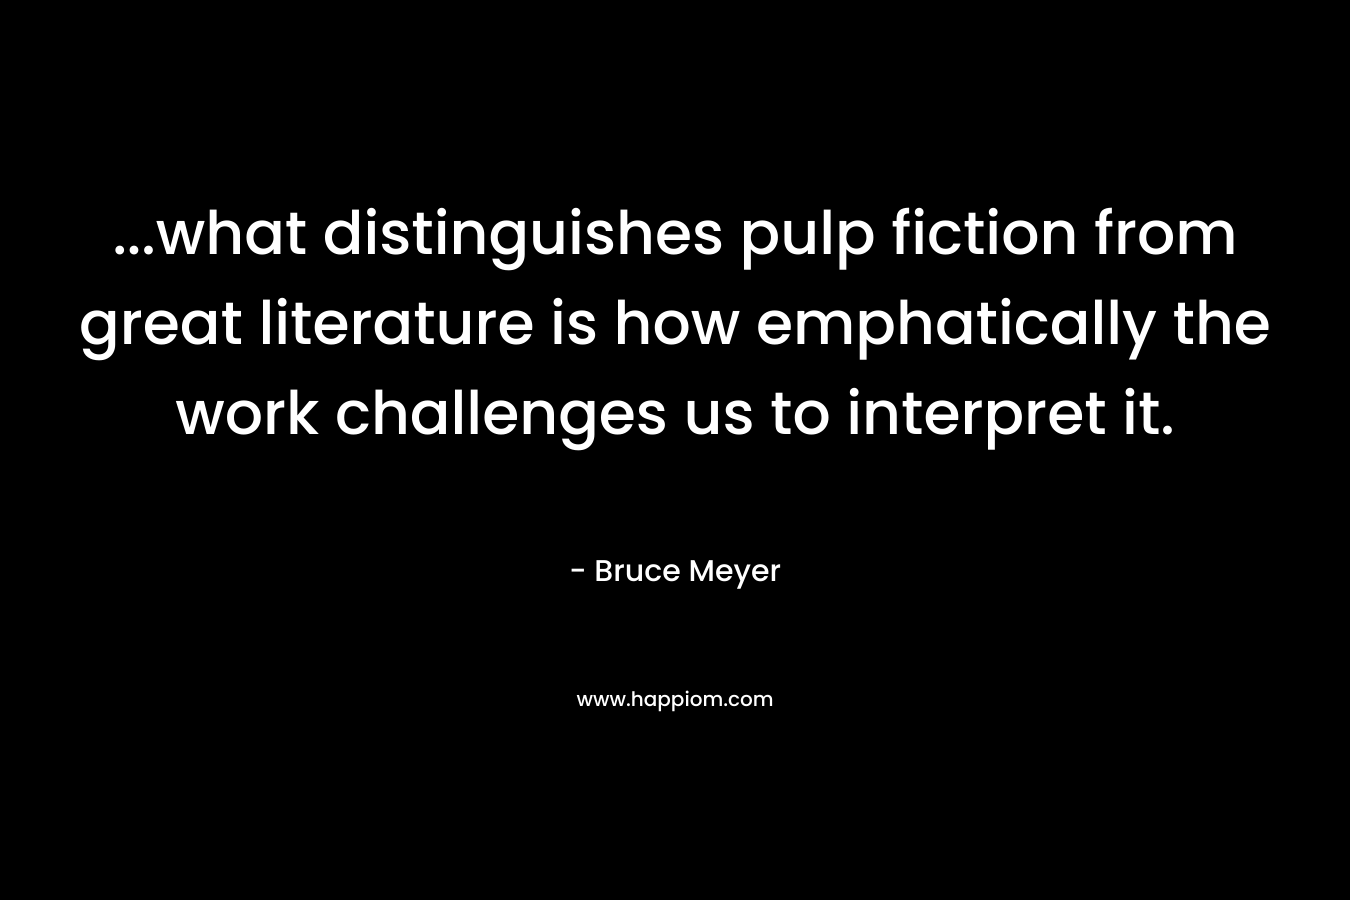 …what distinguishes pulp fiction from great literature is how emphatically the work challenges us to interpret it. – Bruce Meyer